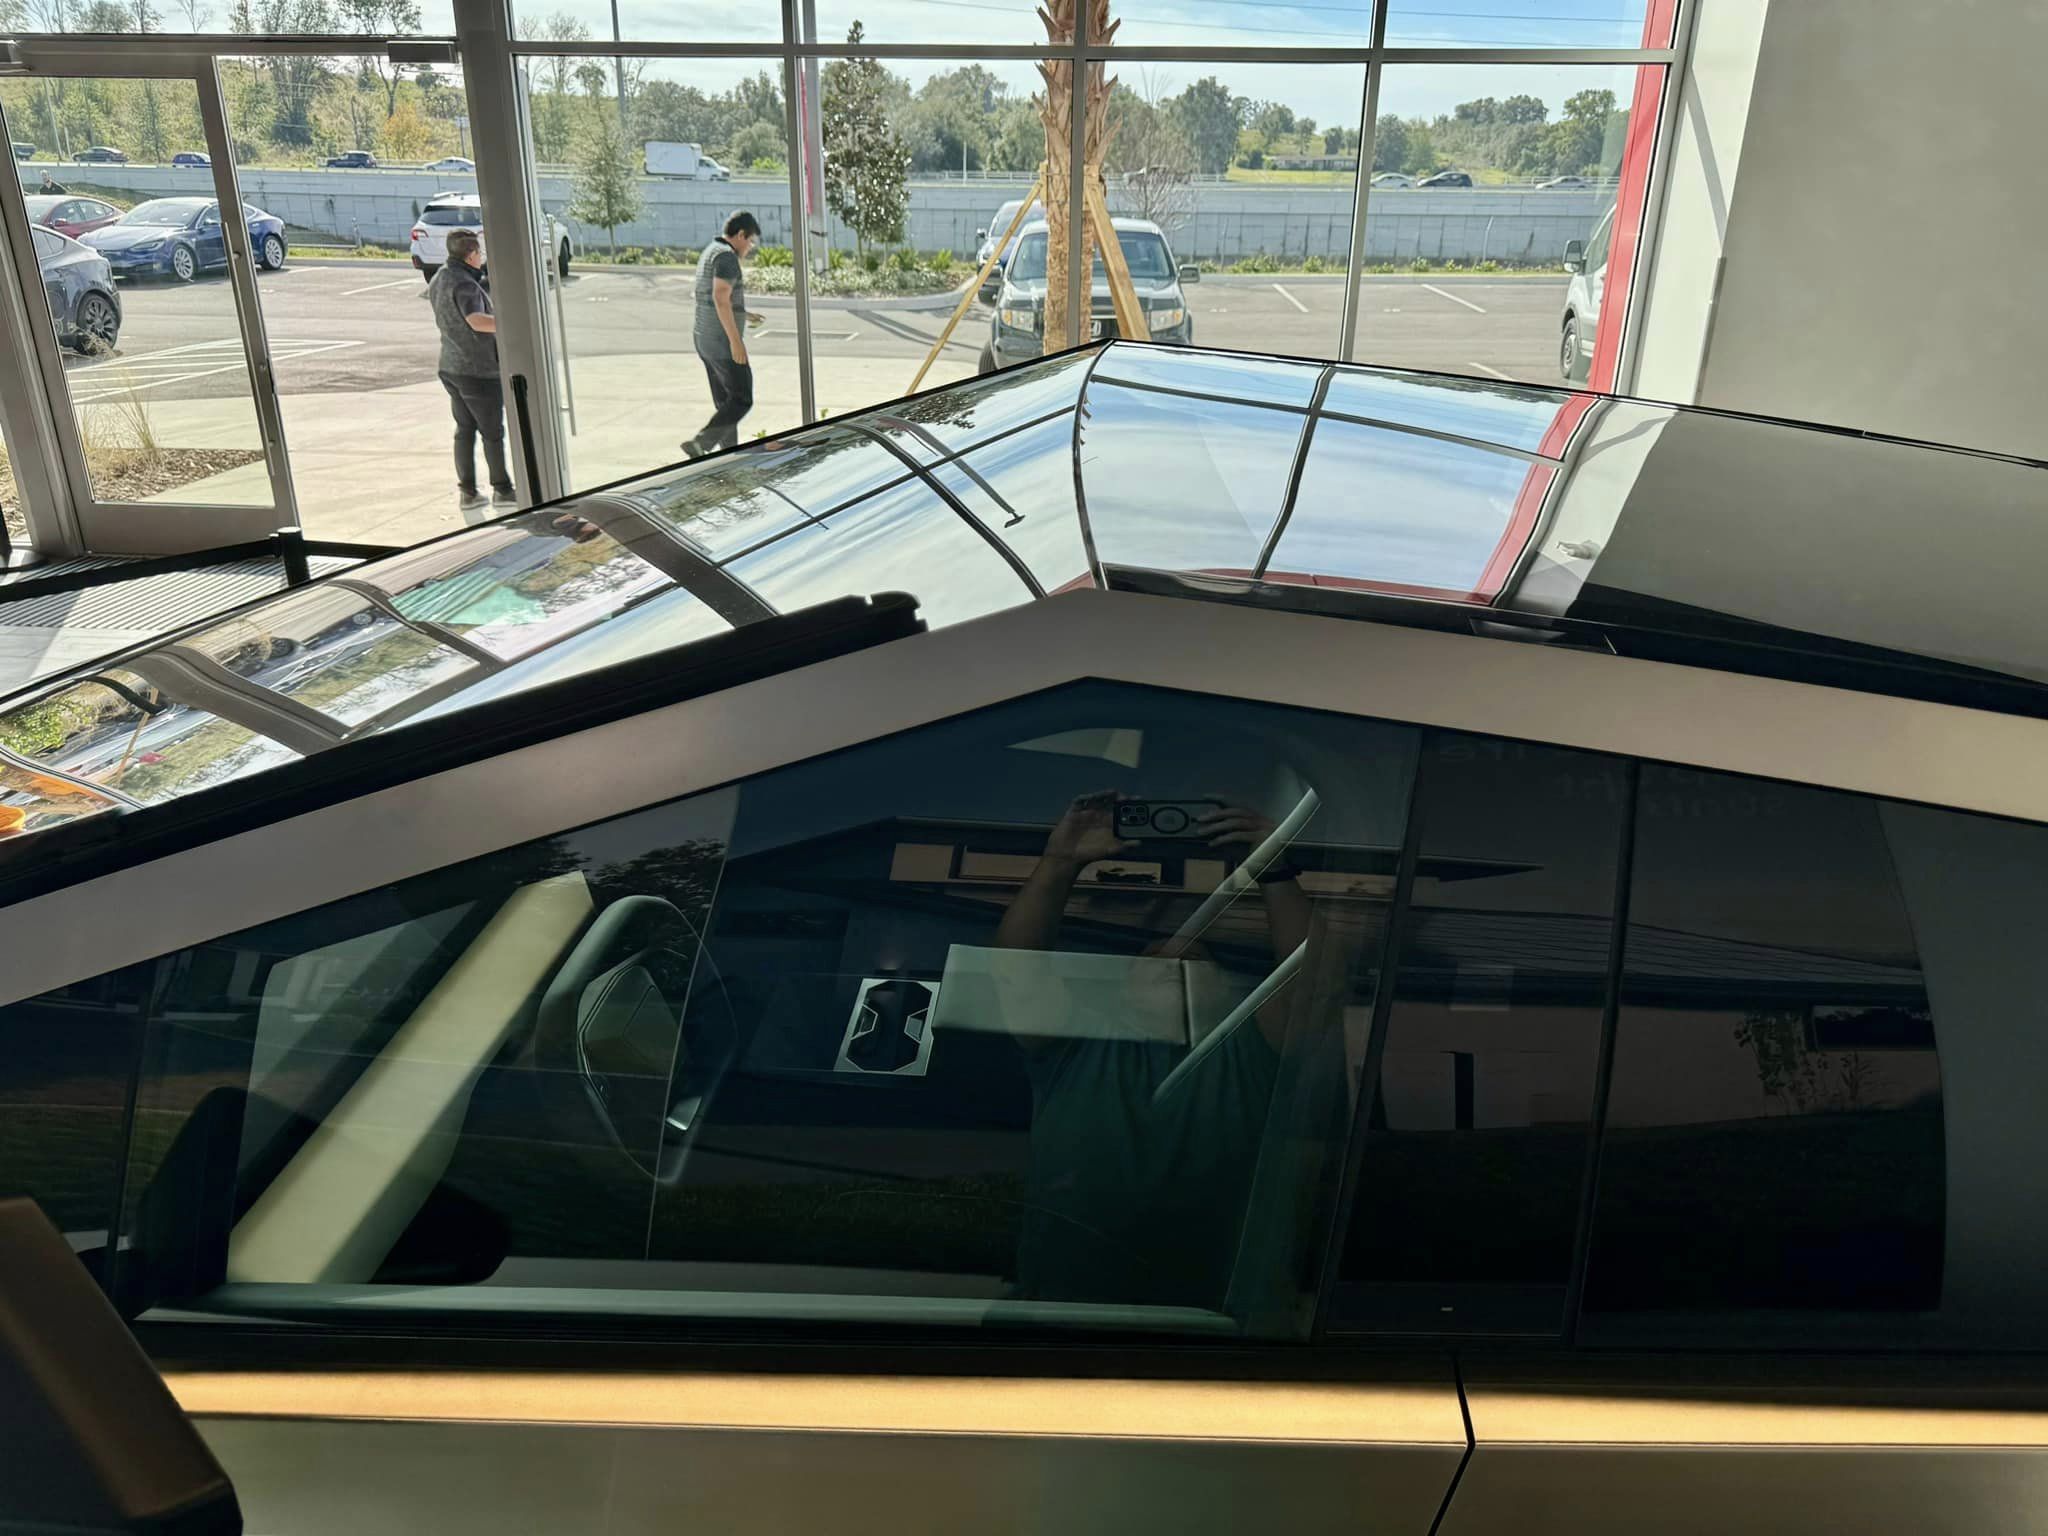 Tesla Cybertruck A Cybertruck appears at just-opened Clermont Florida Tesla Store / Service Center! 408981569_10230402820630340_4446131806374672104_n